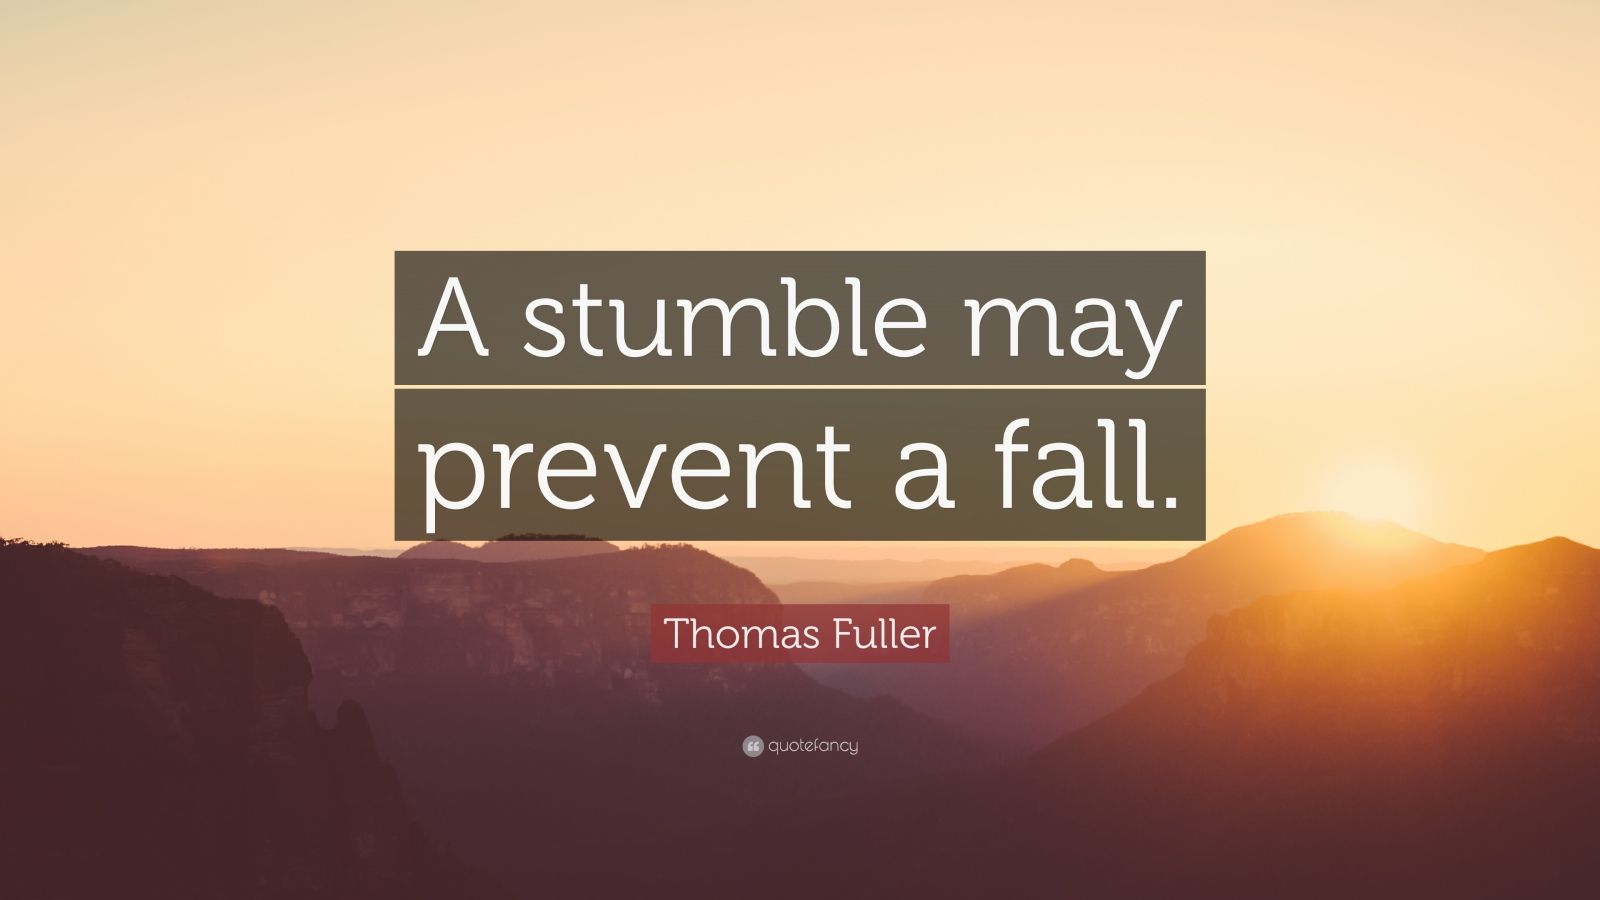 A stumble may prevent a fall essay